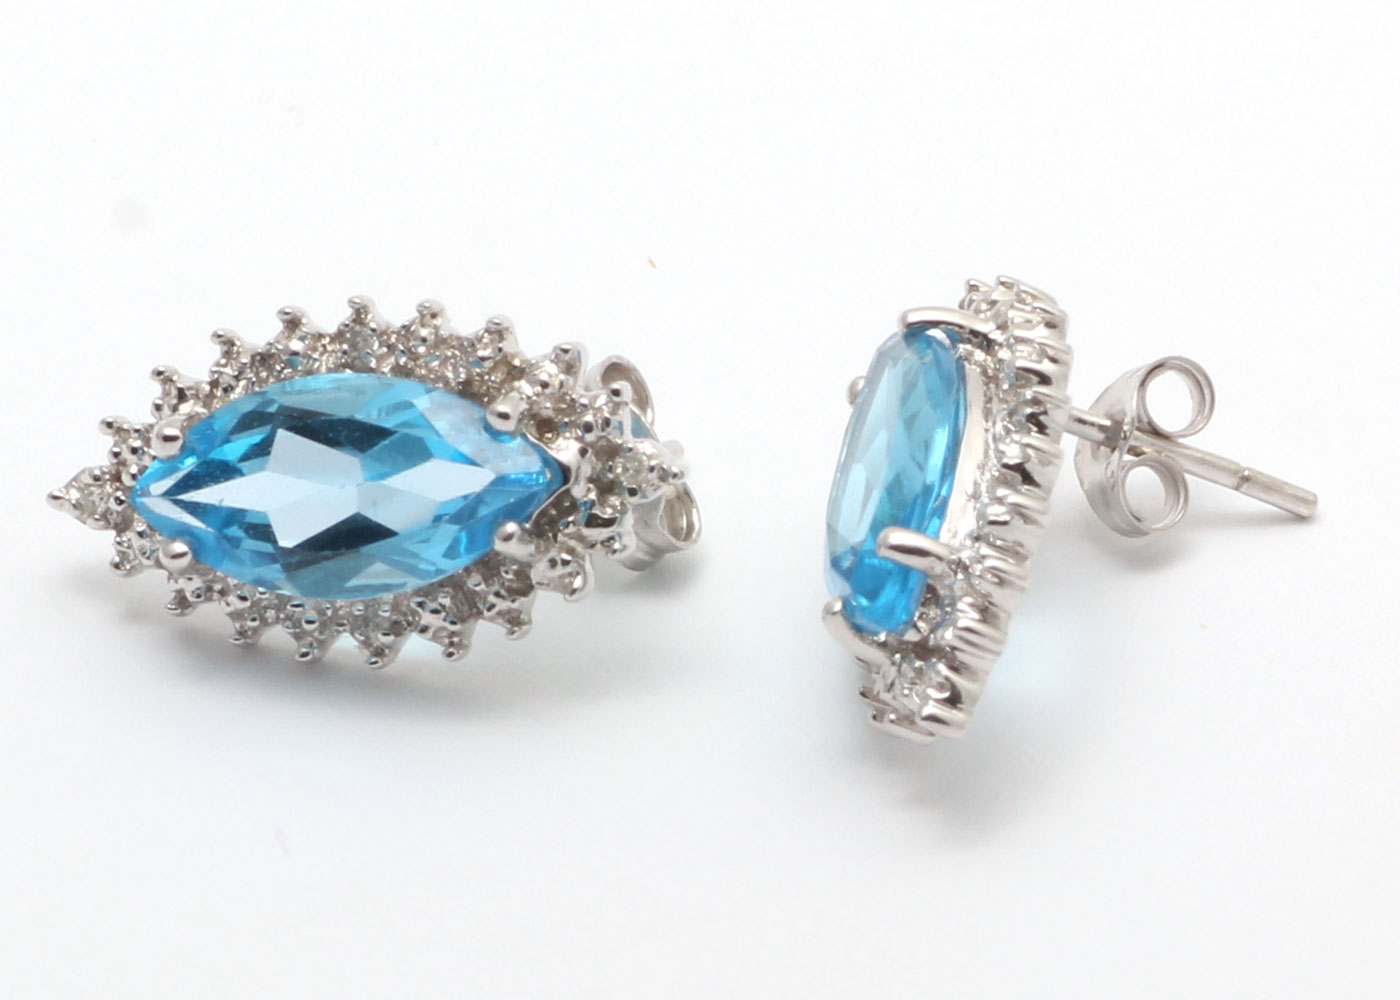 9ct White Gold Diamond and Blue Topaz Earring (BT3.73) 0.02 Carats - Image 2 of 6